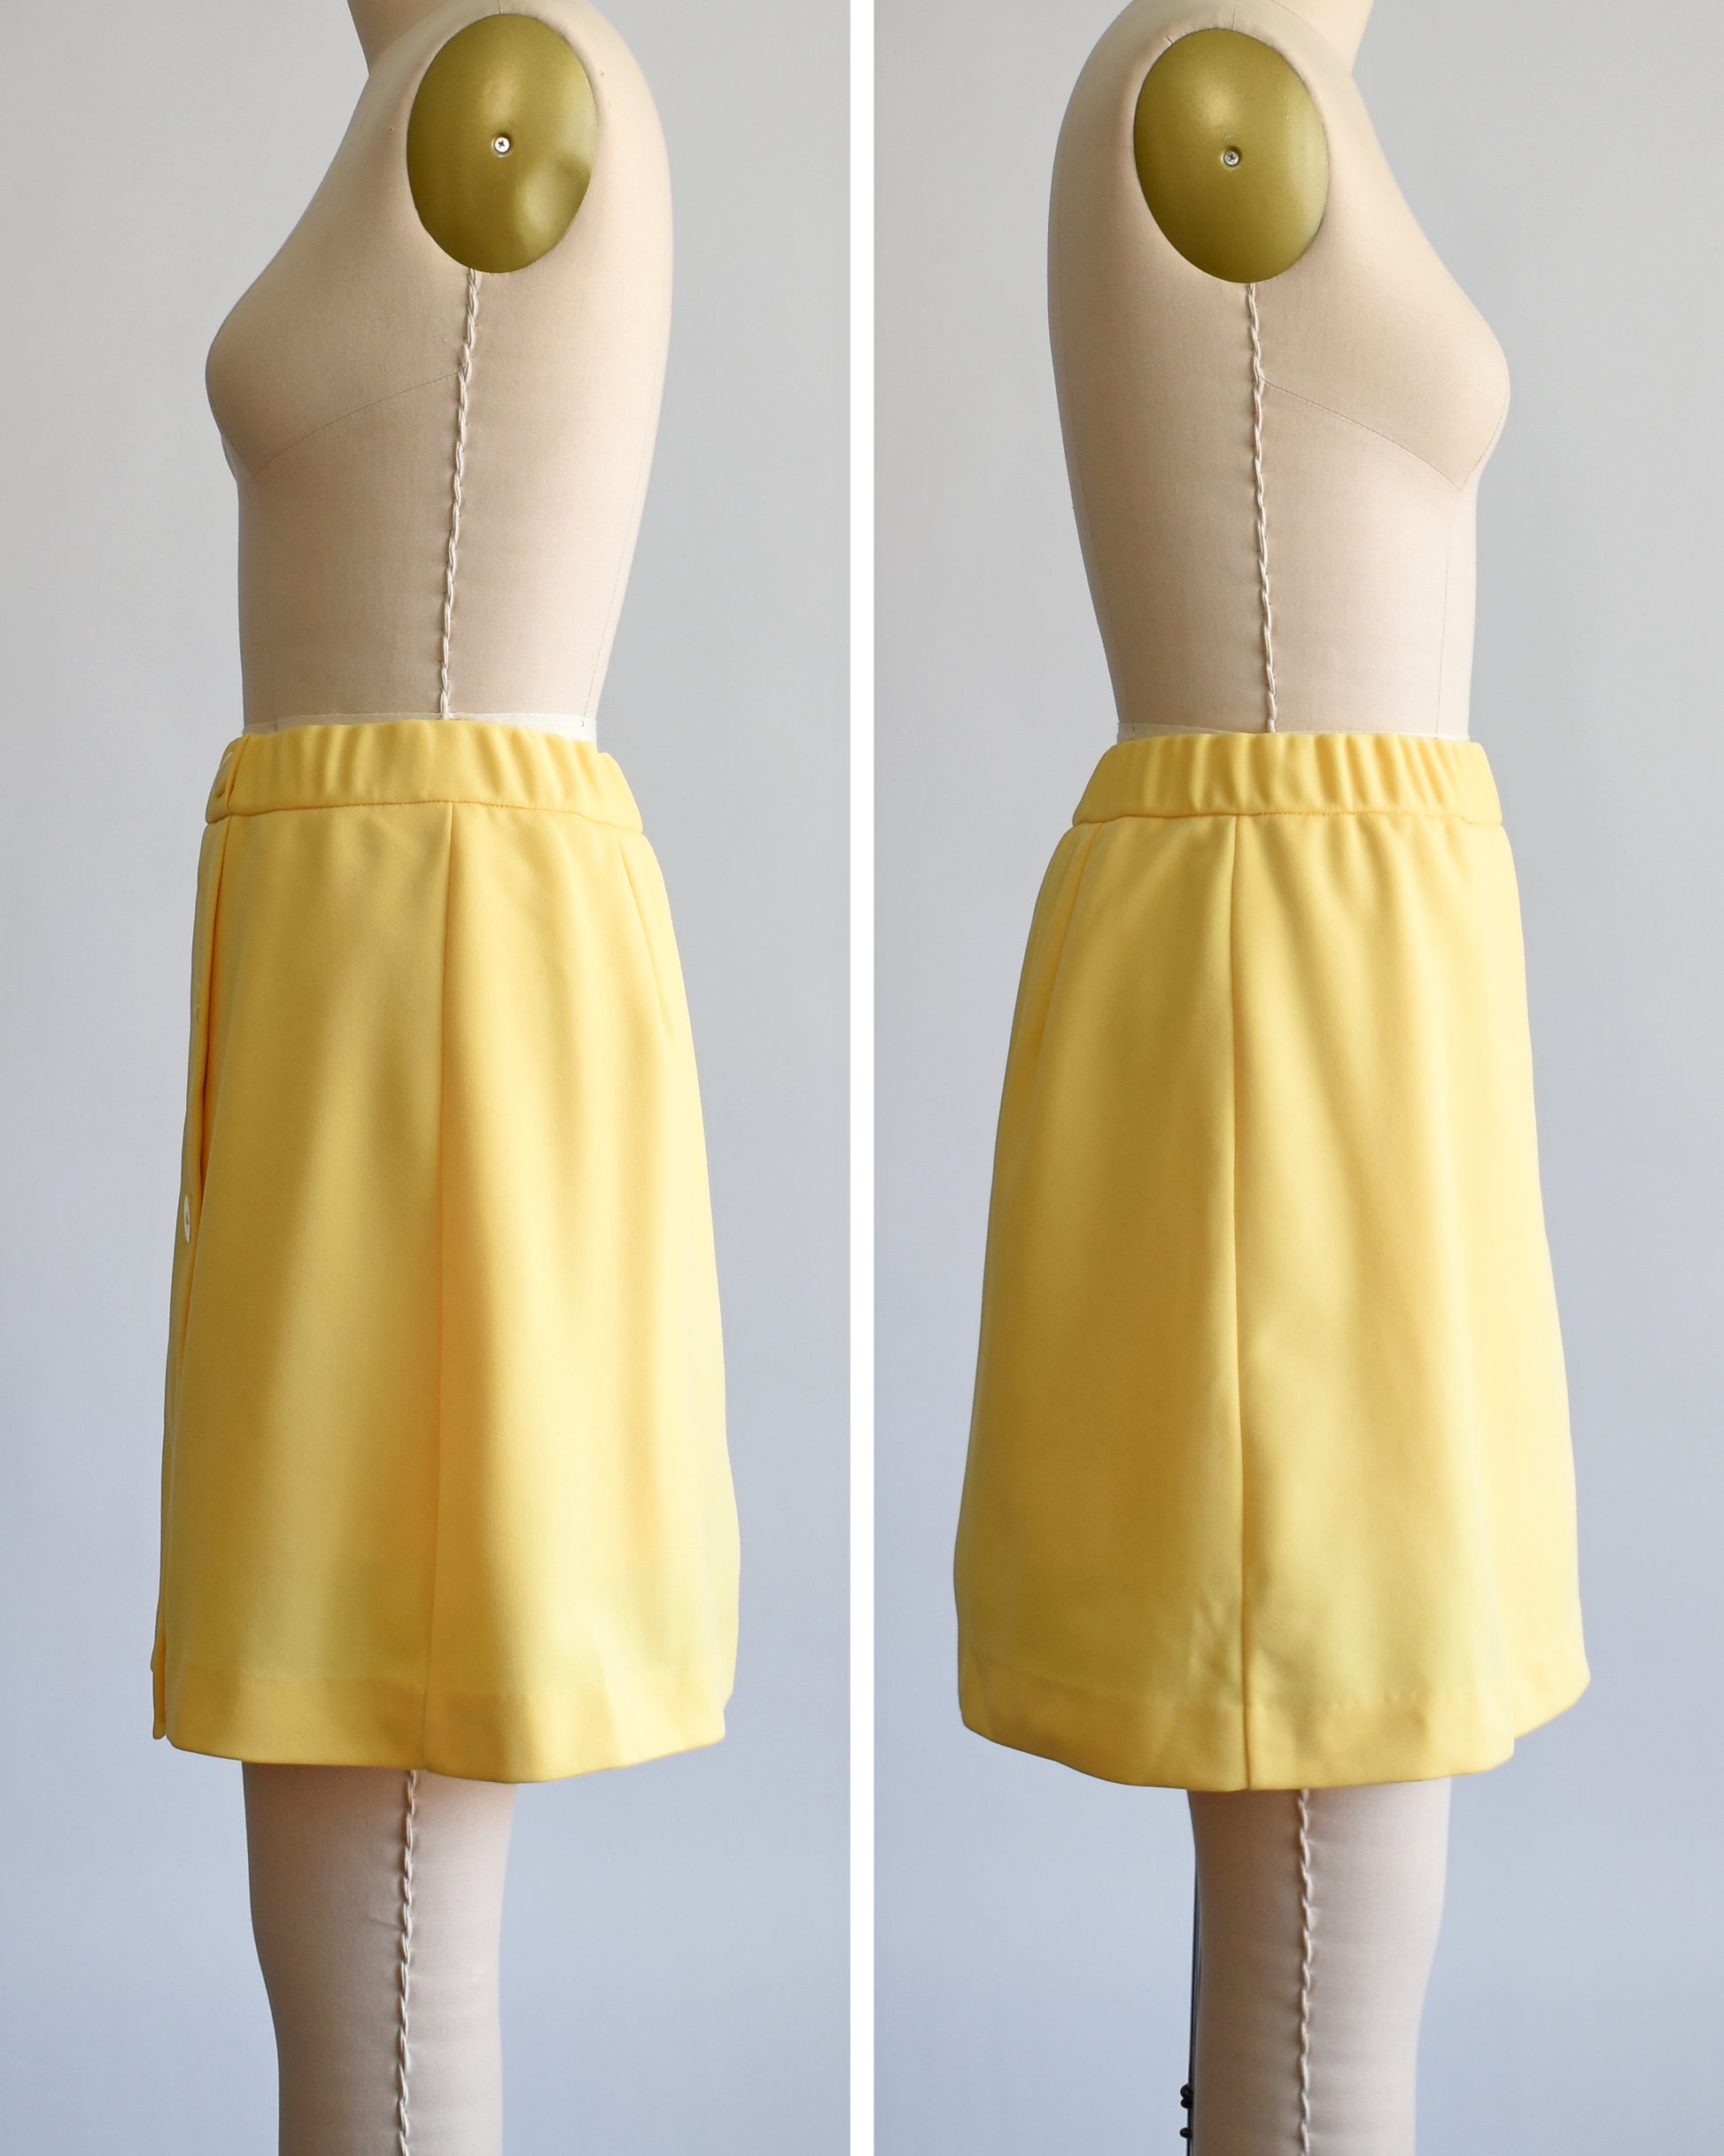 side by side views of a vintage 1970s skort with three decorative buttons along the left side